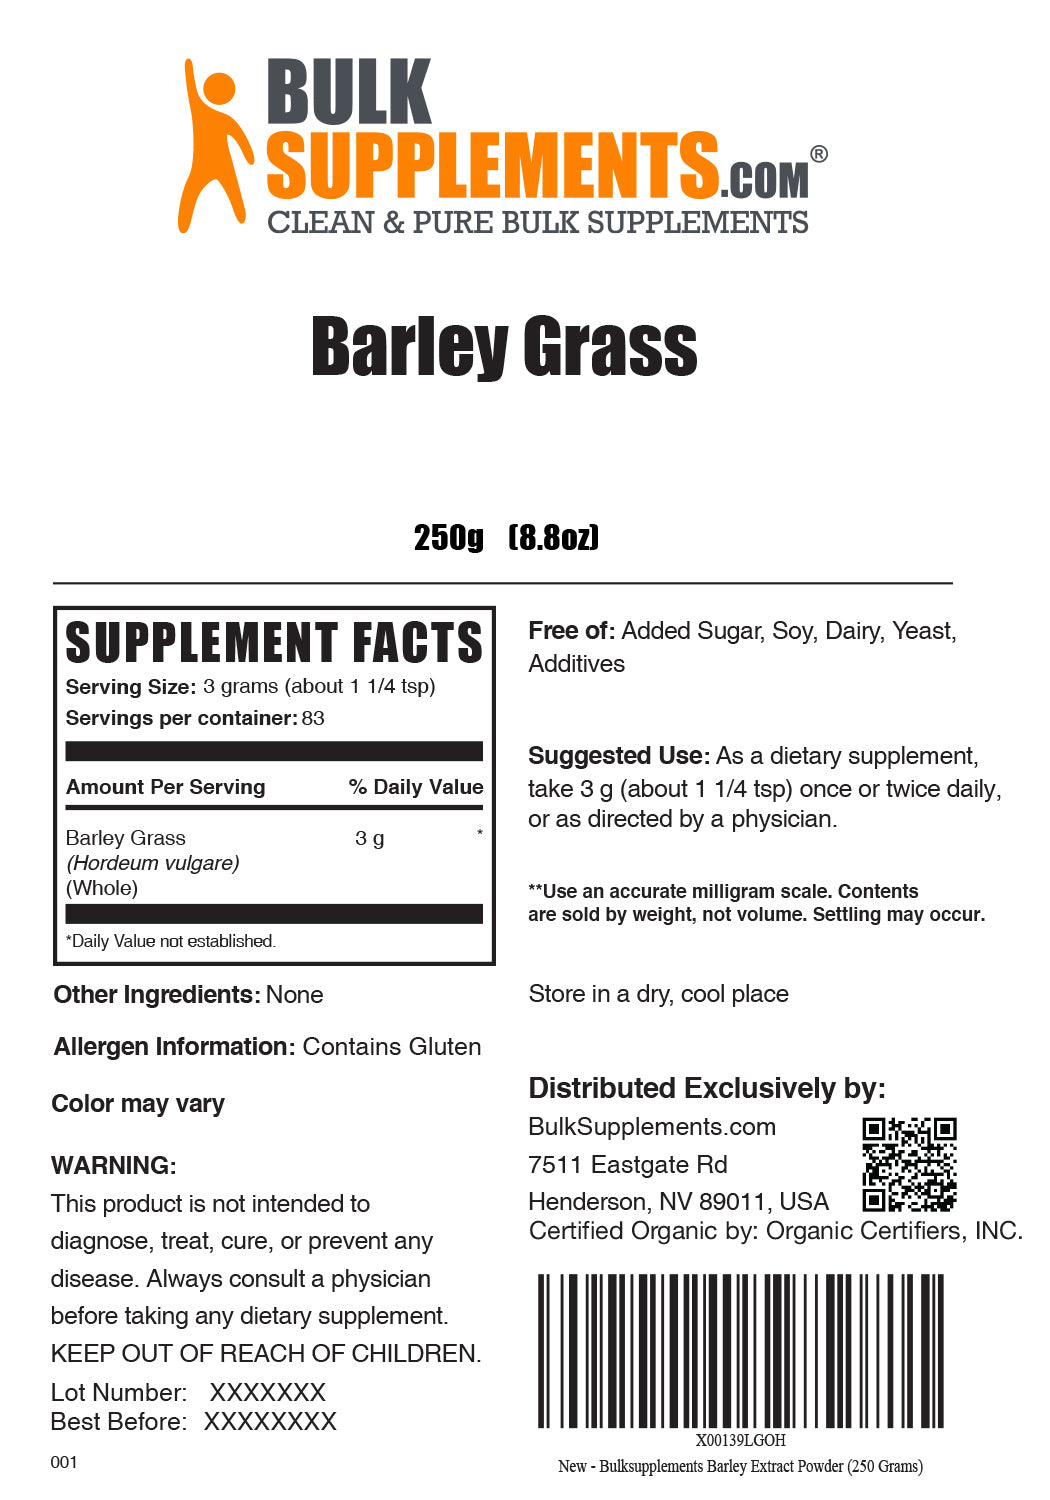 Organic Barley Grass Supplement Facts and Serving Size for 250g bag